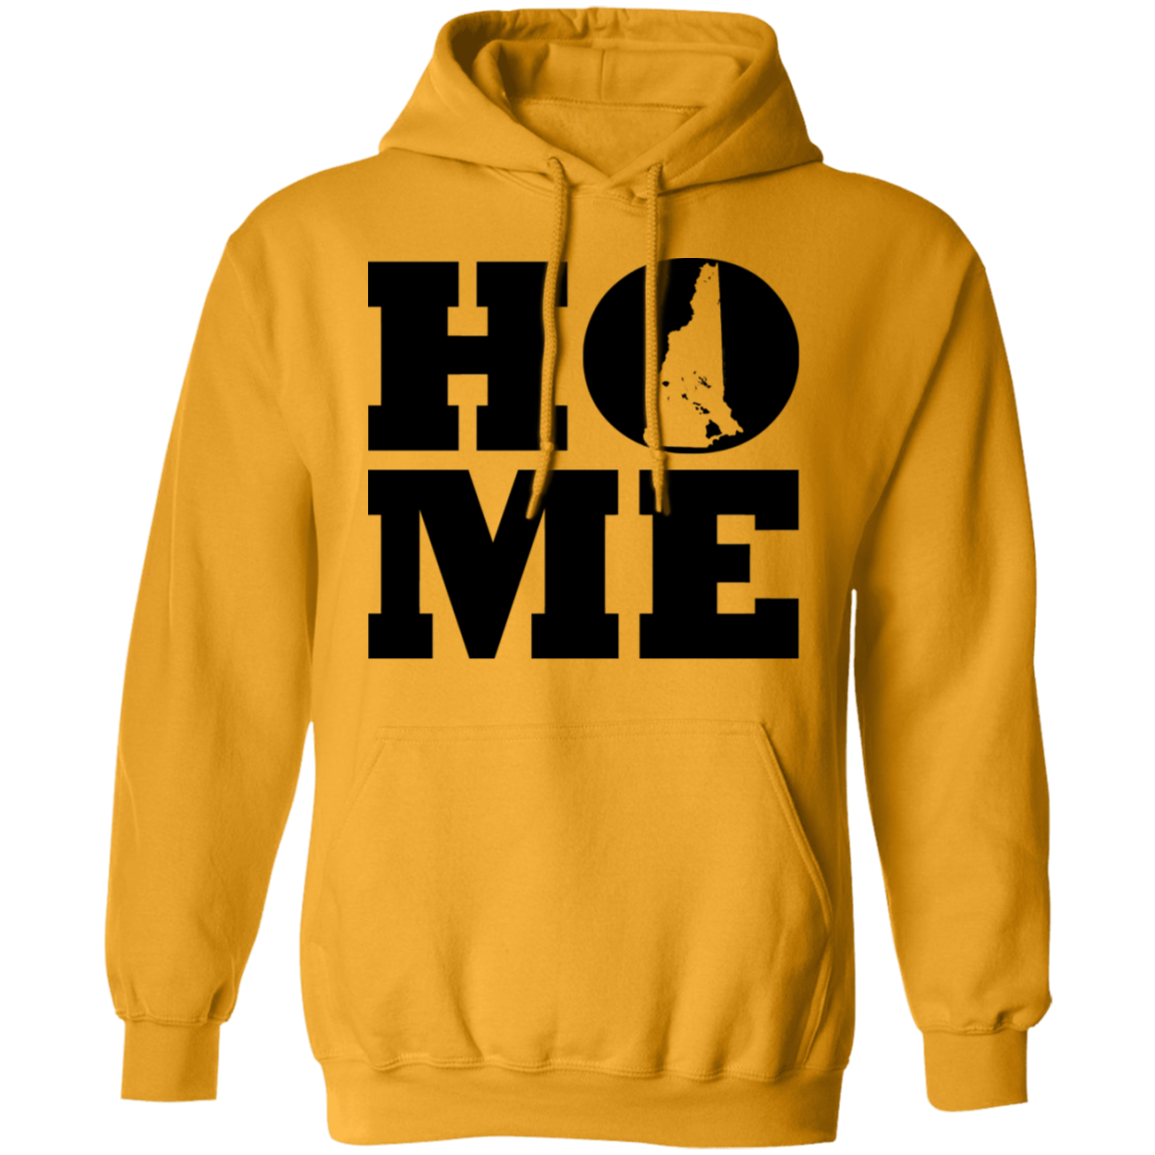 Home Roots Hawai'i and New Hampshire Pullover Hoodie